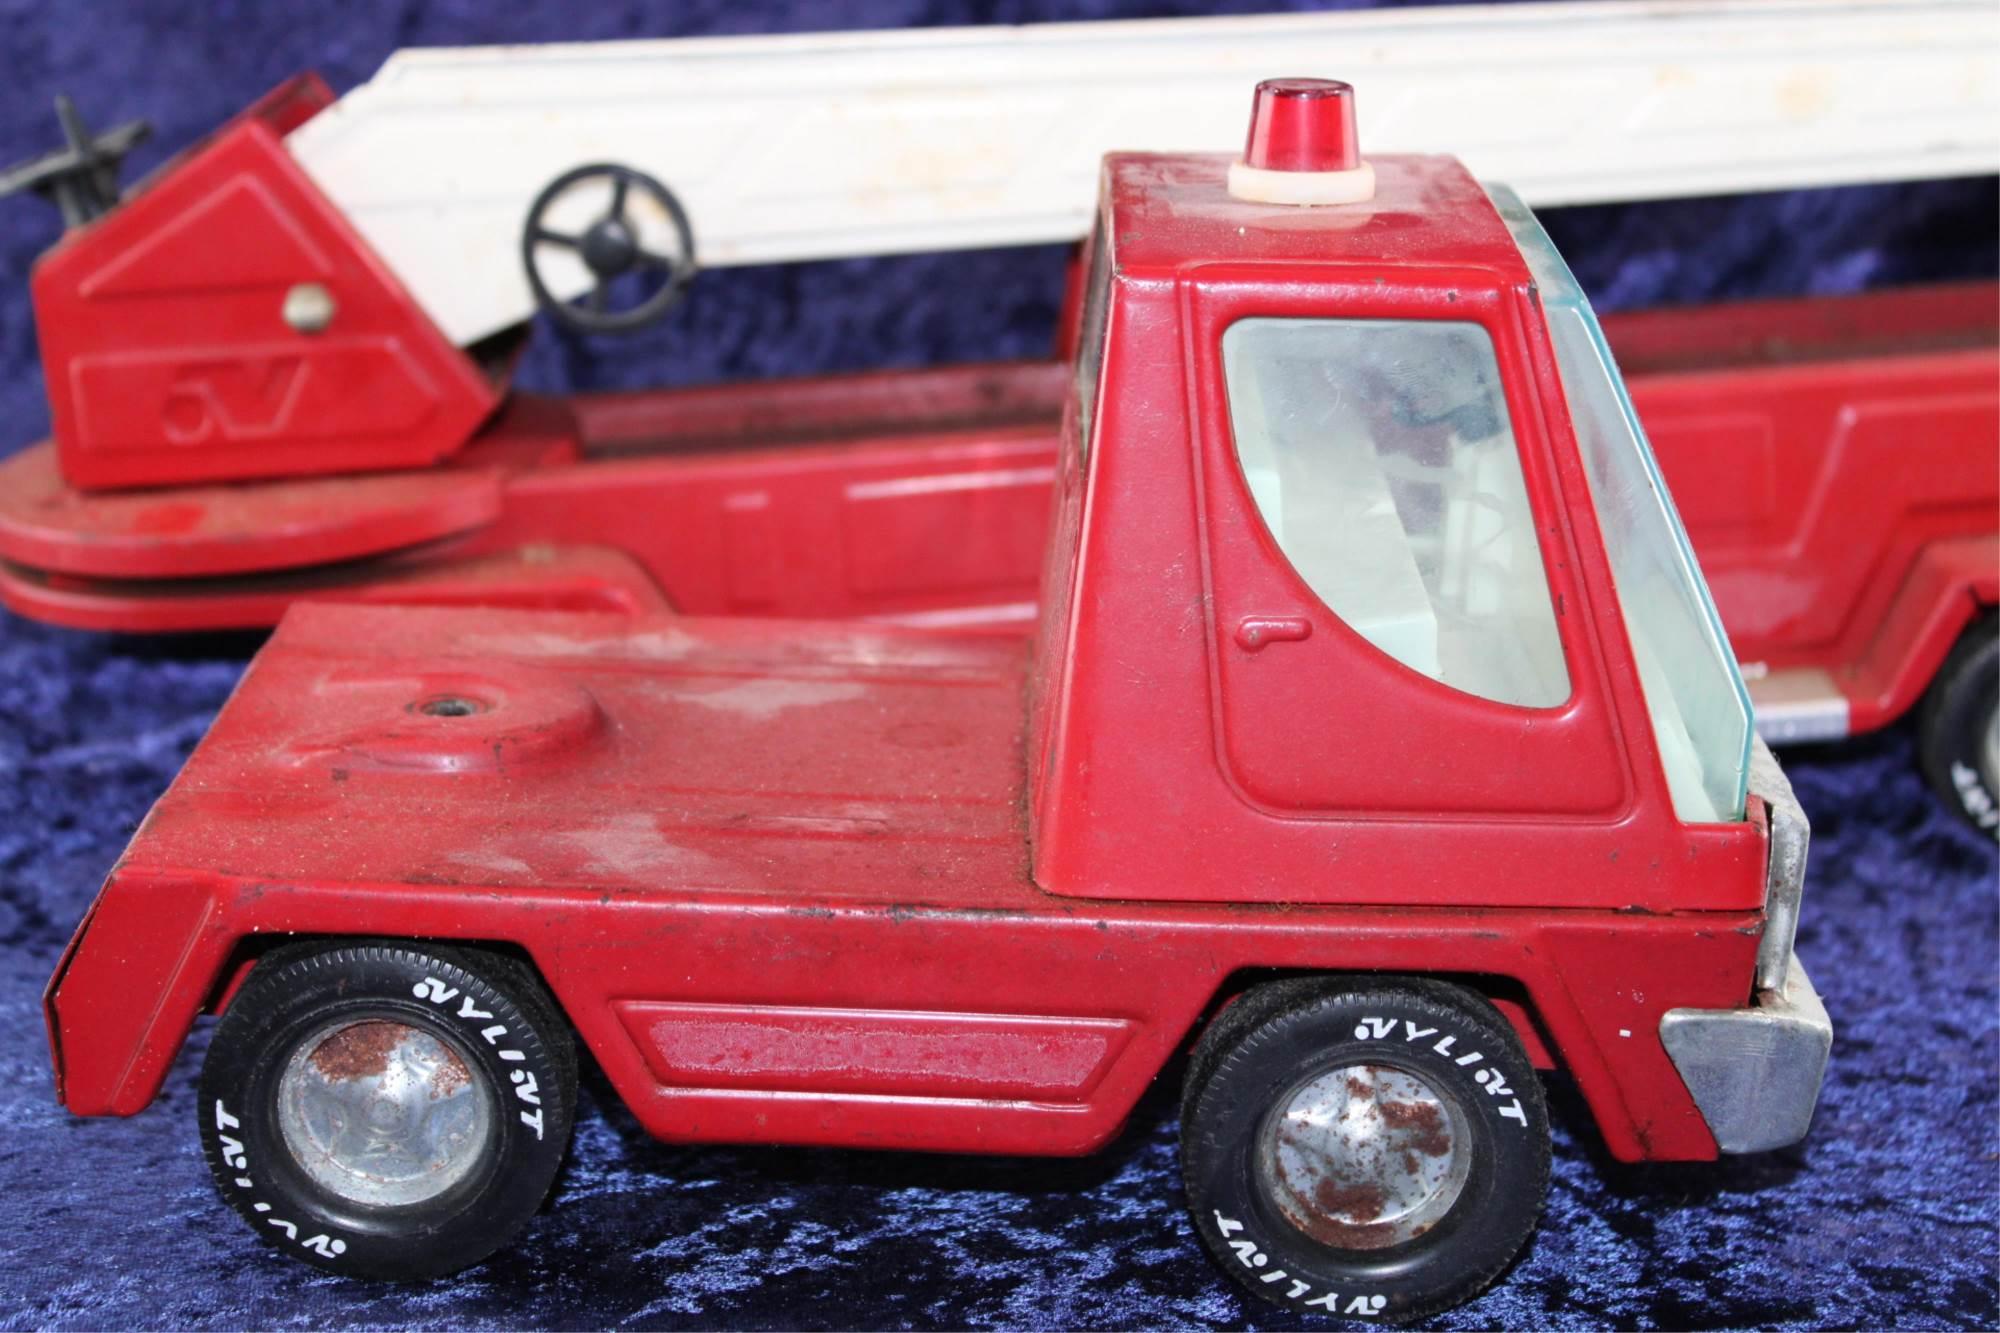 NYLINT FIRETUCK AND REMOTE CONTROLLED TRUCK